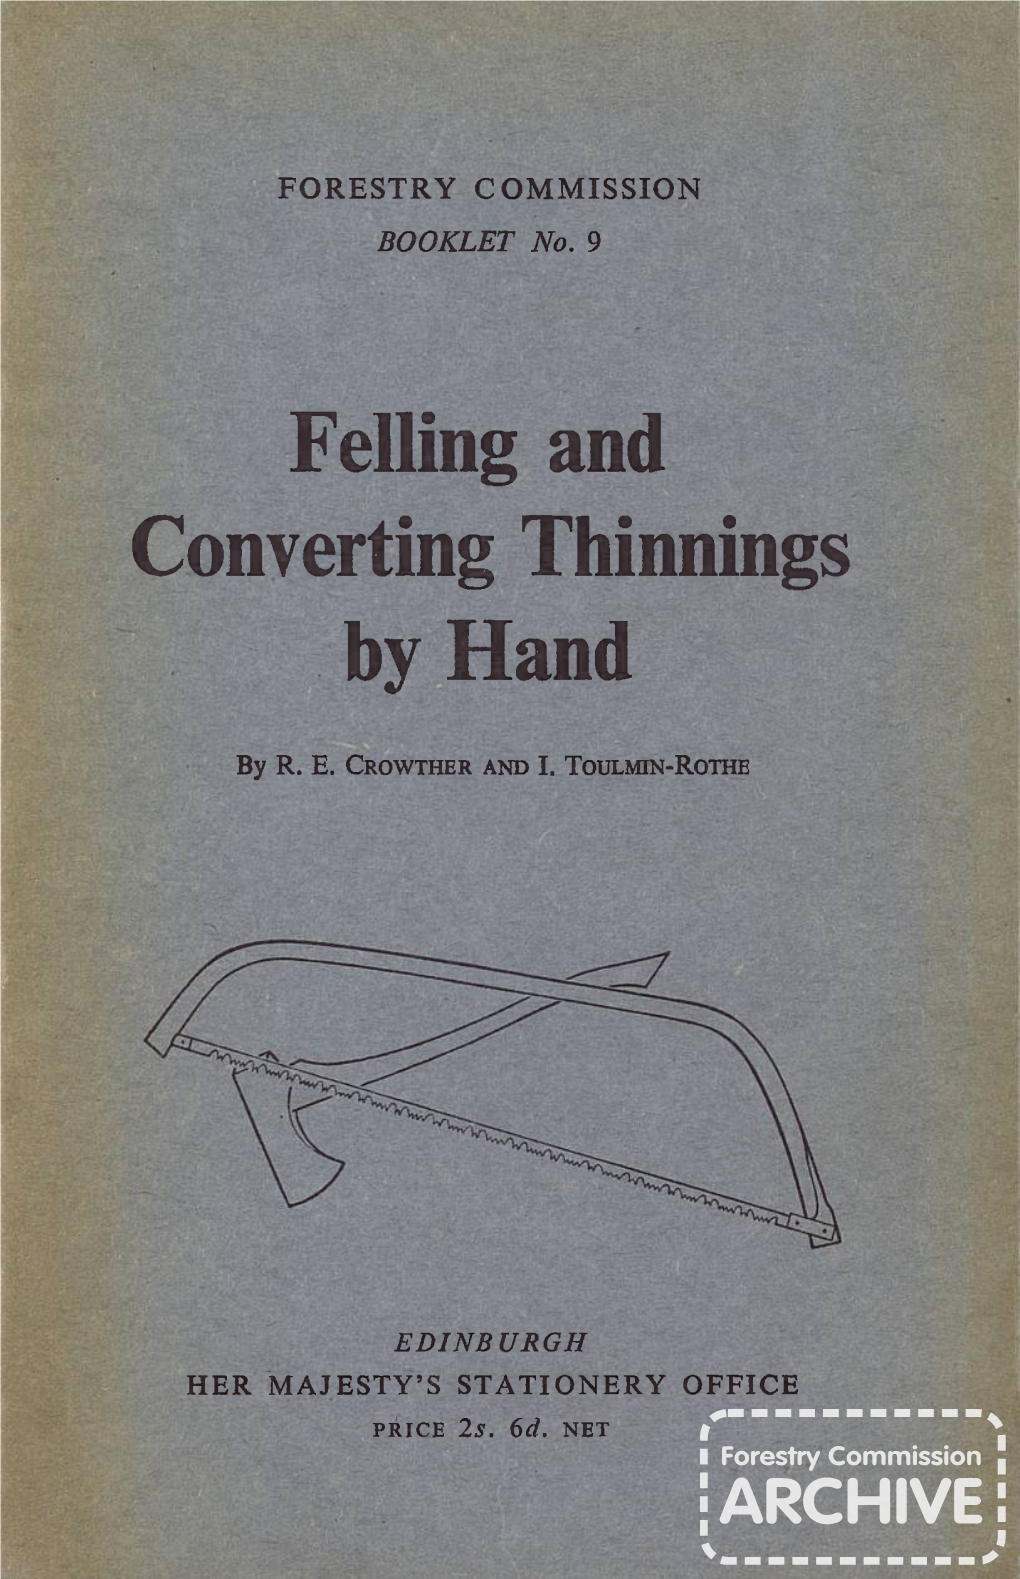 Felling and Converting Thinnings by Hand